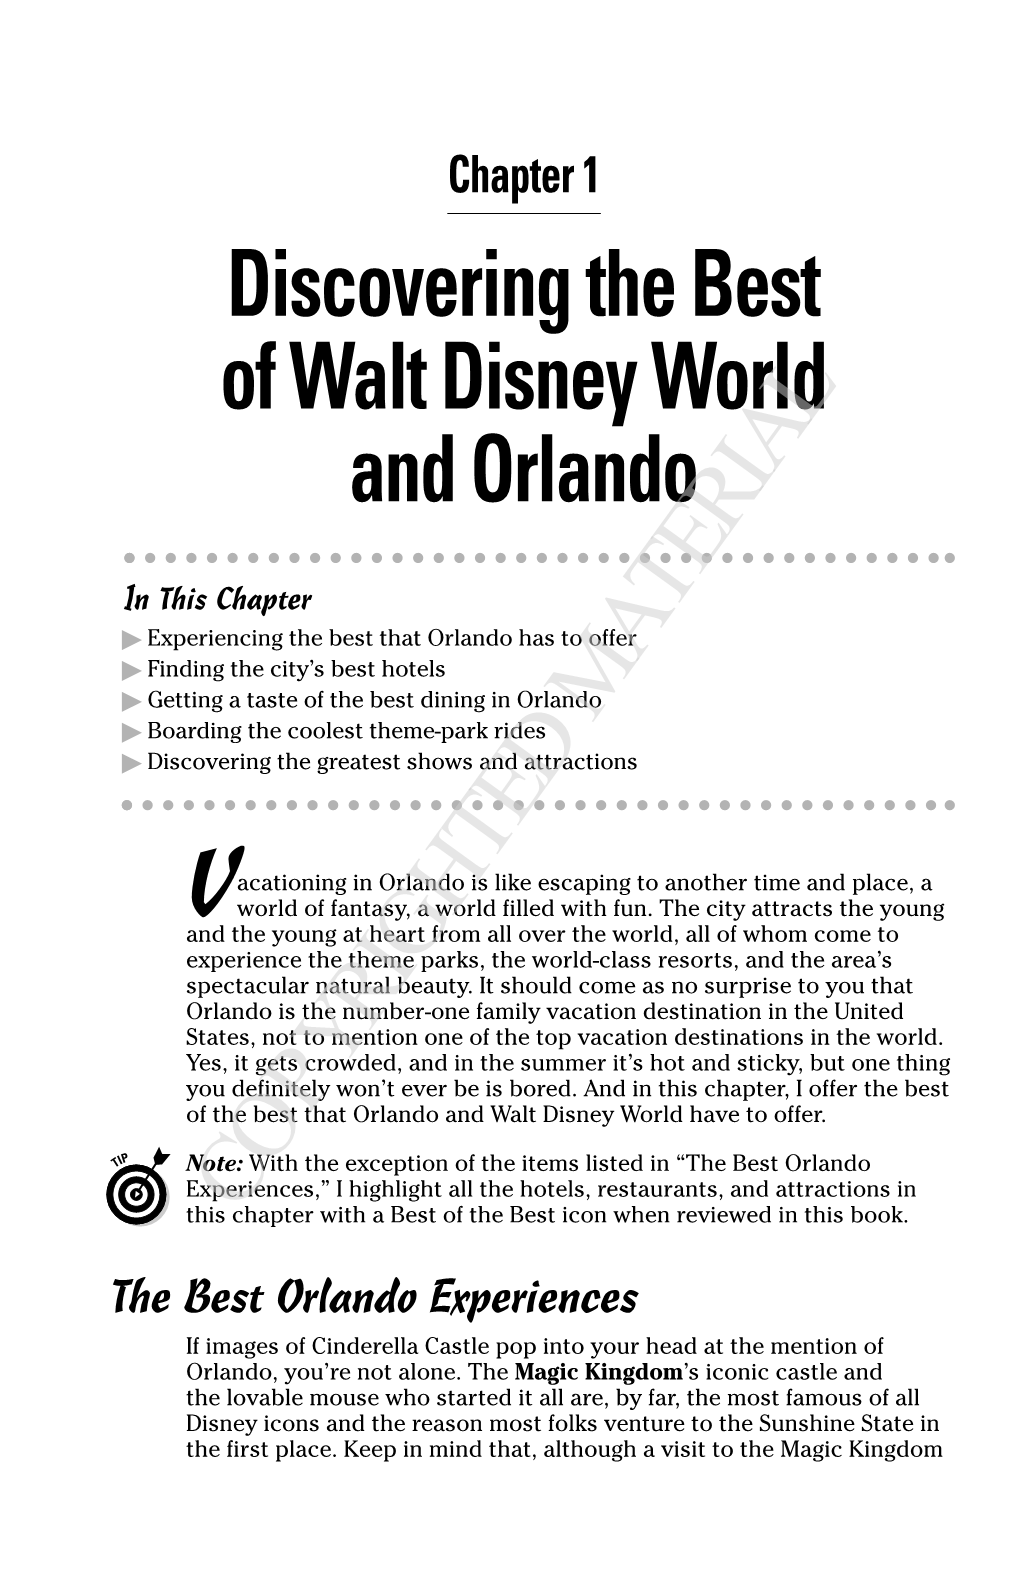 Discovering the Best of Walt Disney World and Orlando